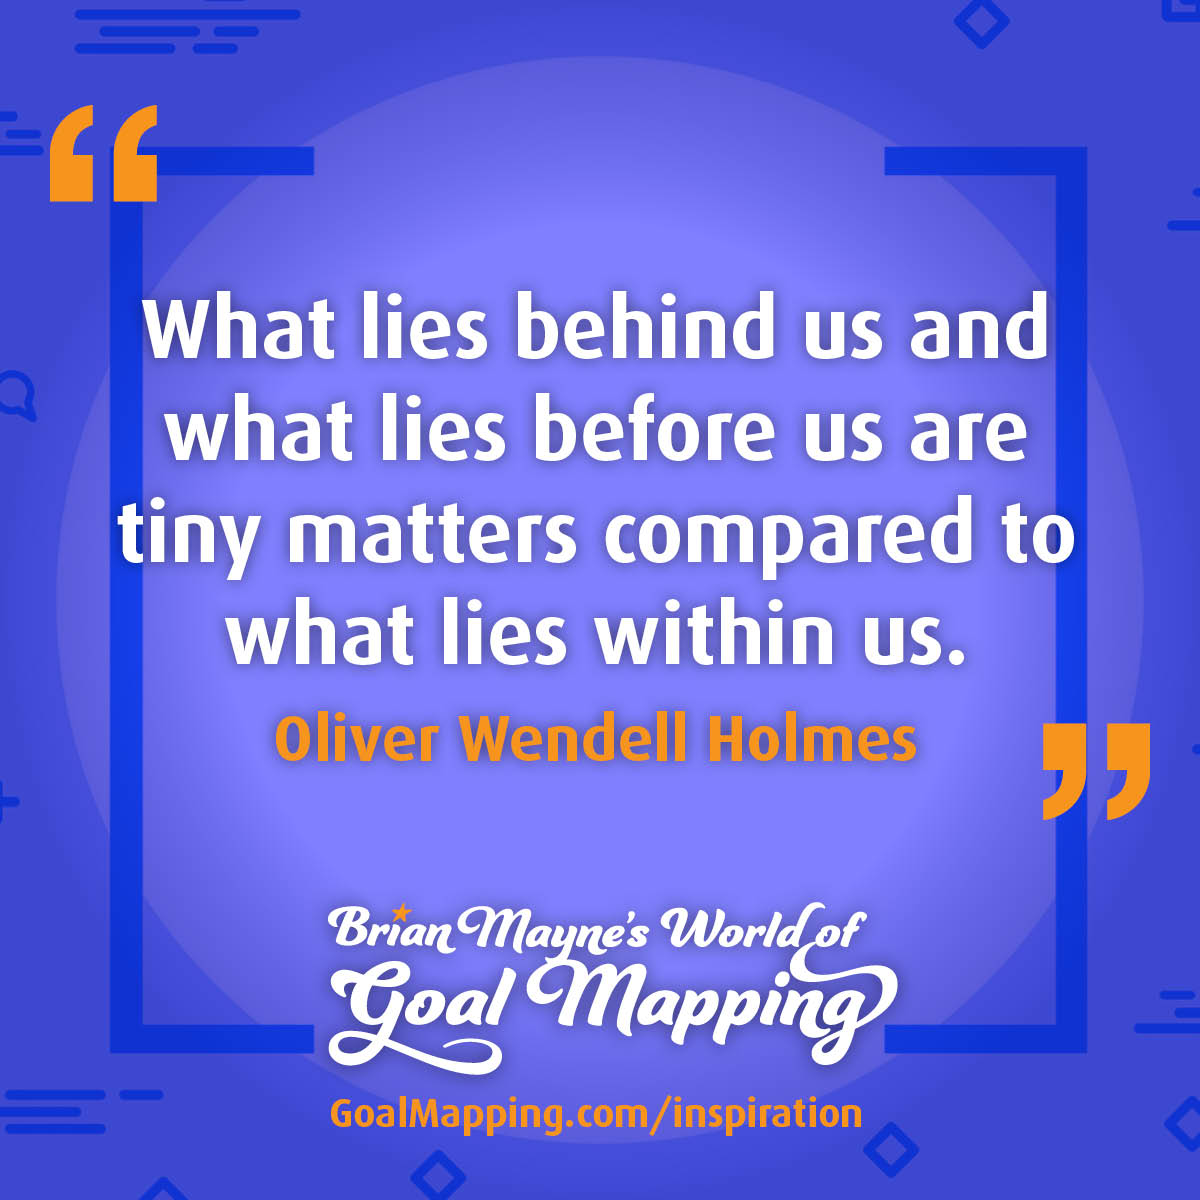 "What lies behind us and what lies before us are tiny matters compared to what lies within us." Oliver Wendell Holmes